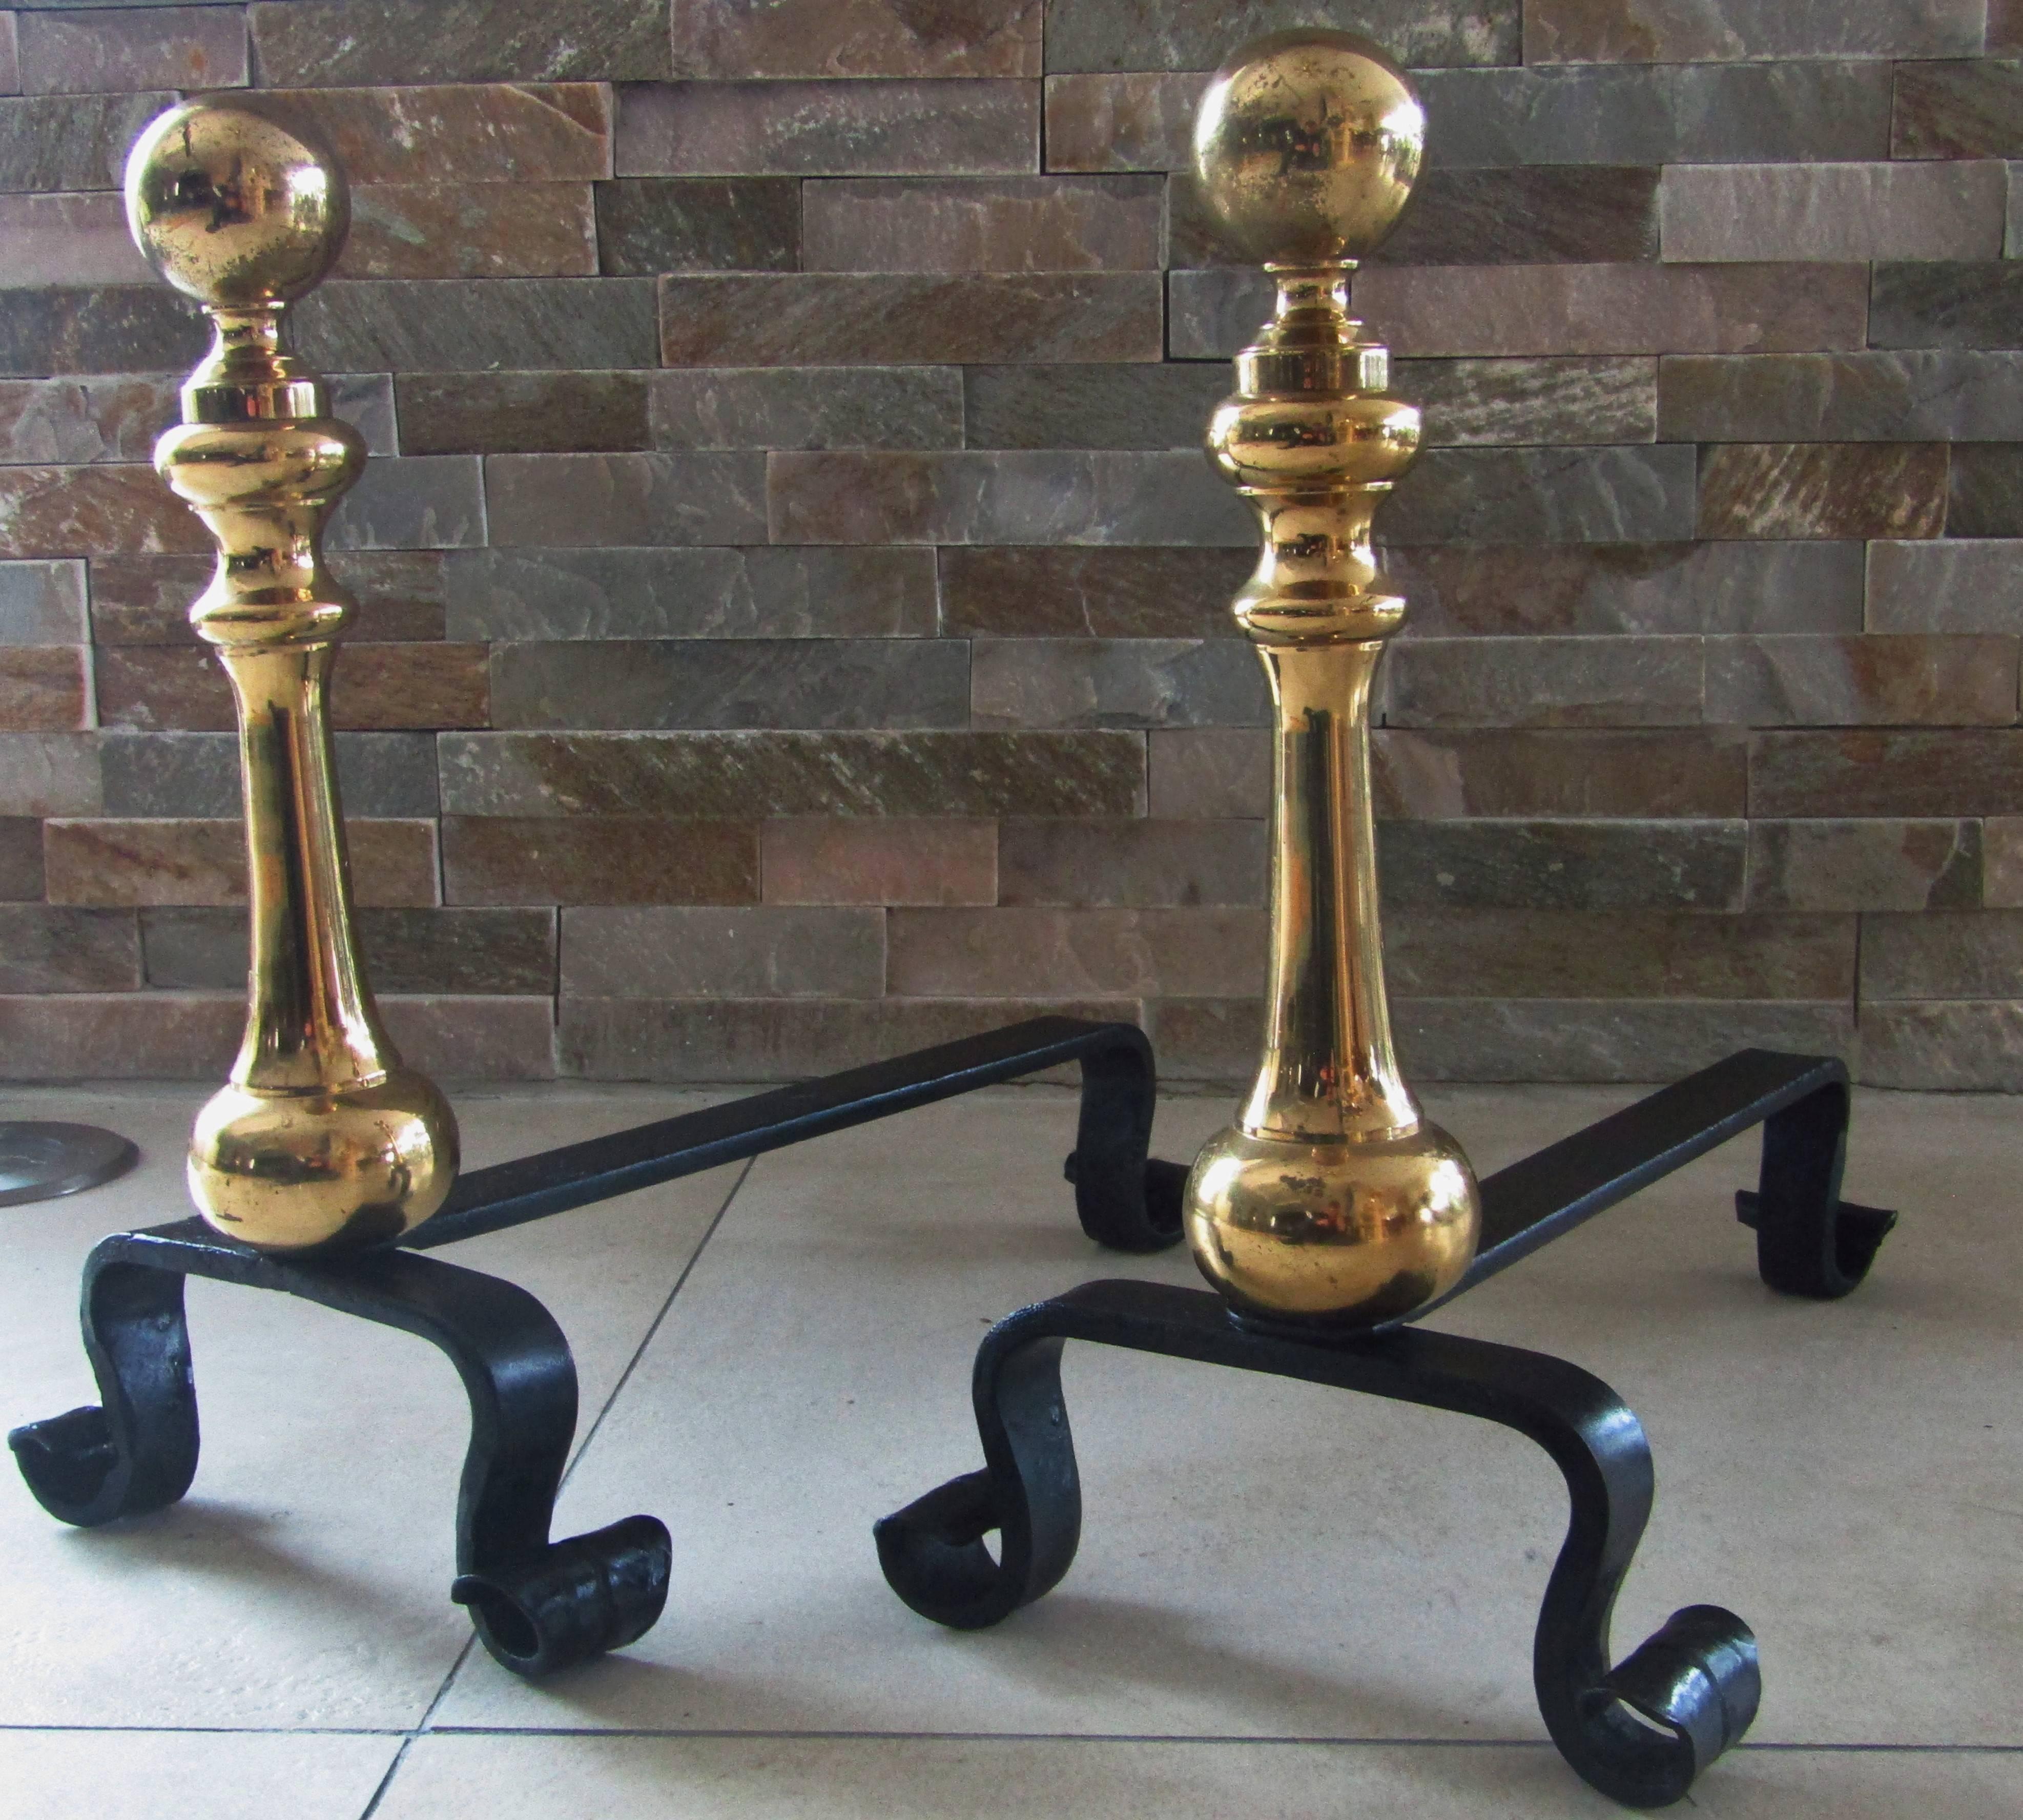 Pair of Wrought Iron and Brass Andirons, France, 1890 (Spätes 19. Jahrhundert)